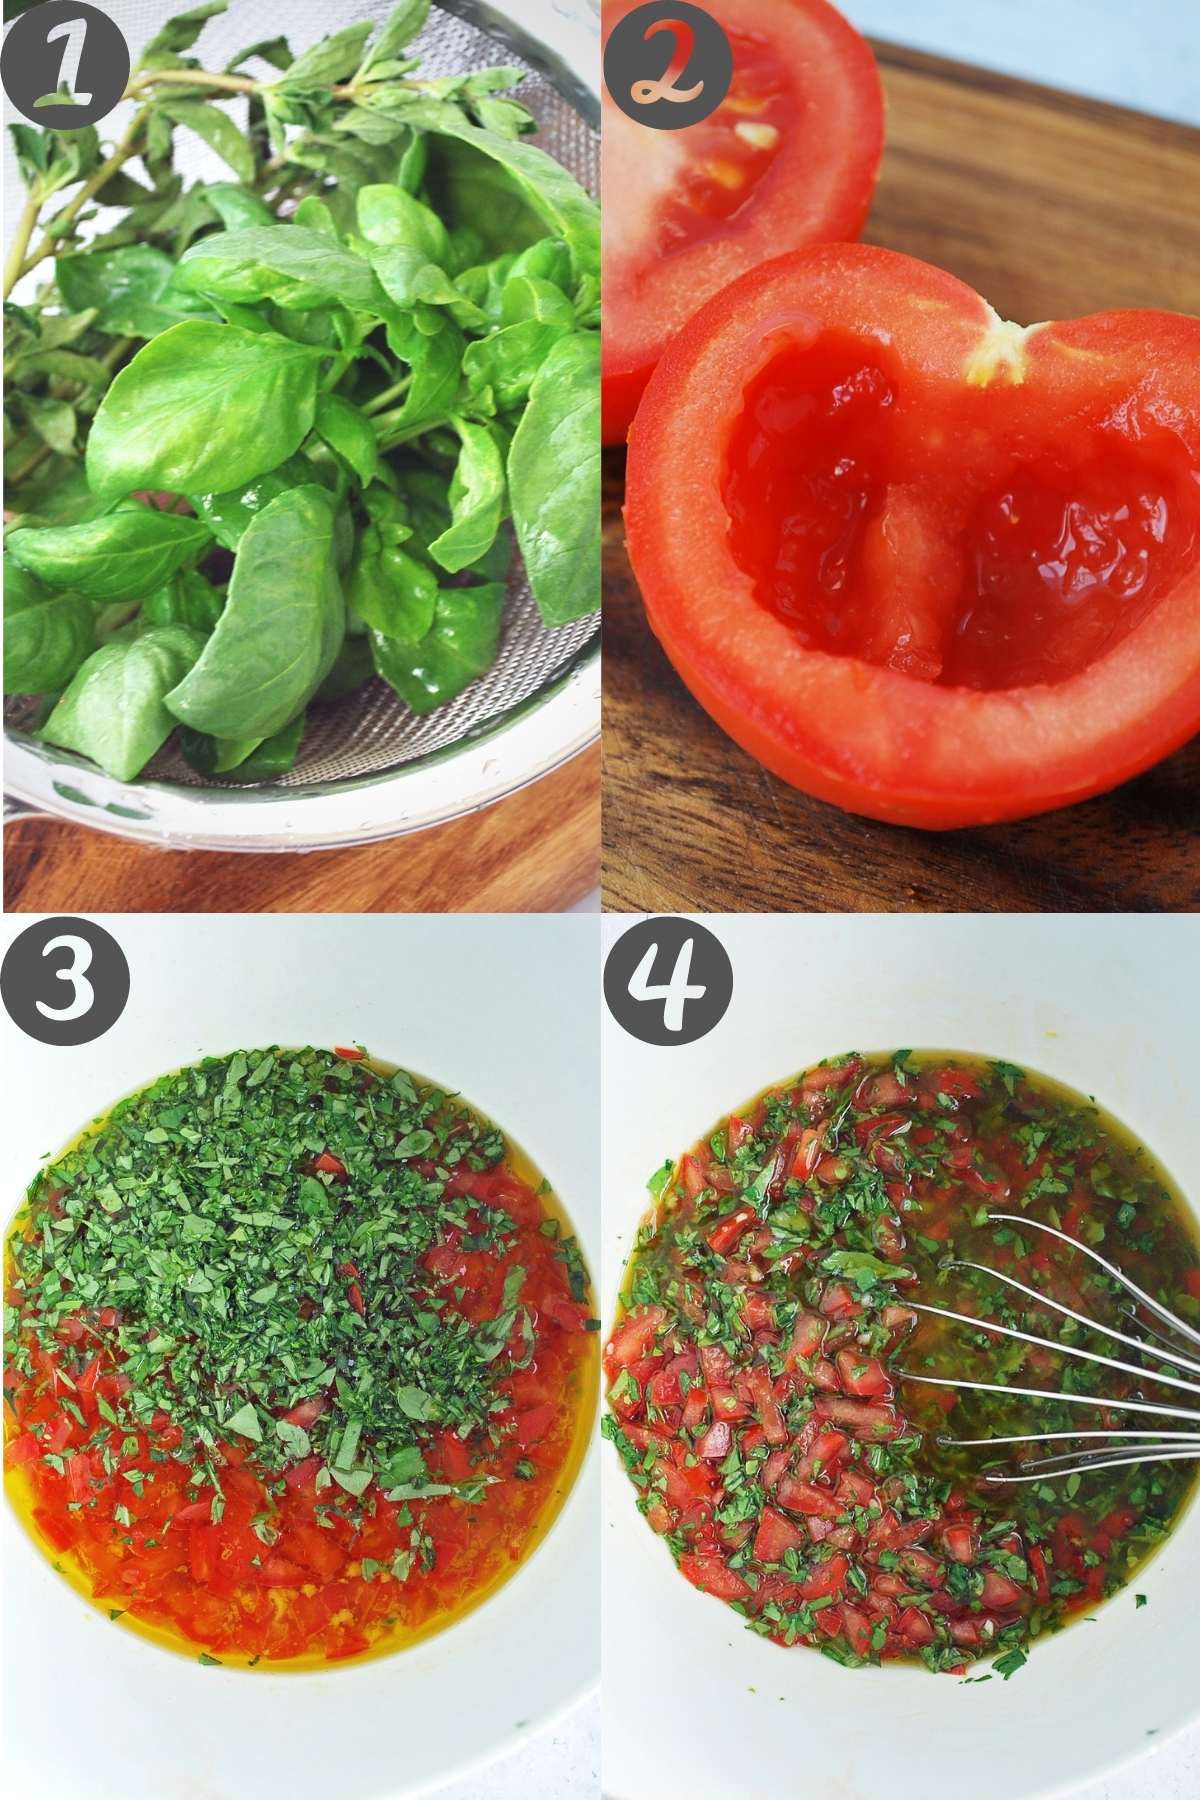 steps for making tomato basil pasta sauce: rinsing the herbs, seeding the tomato, all ingredients in a bowl, and ingredients whisked together